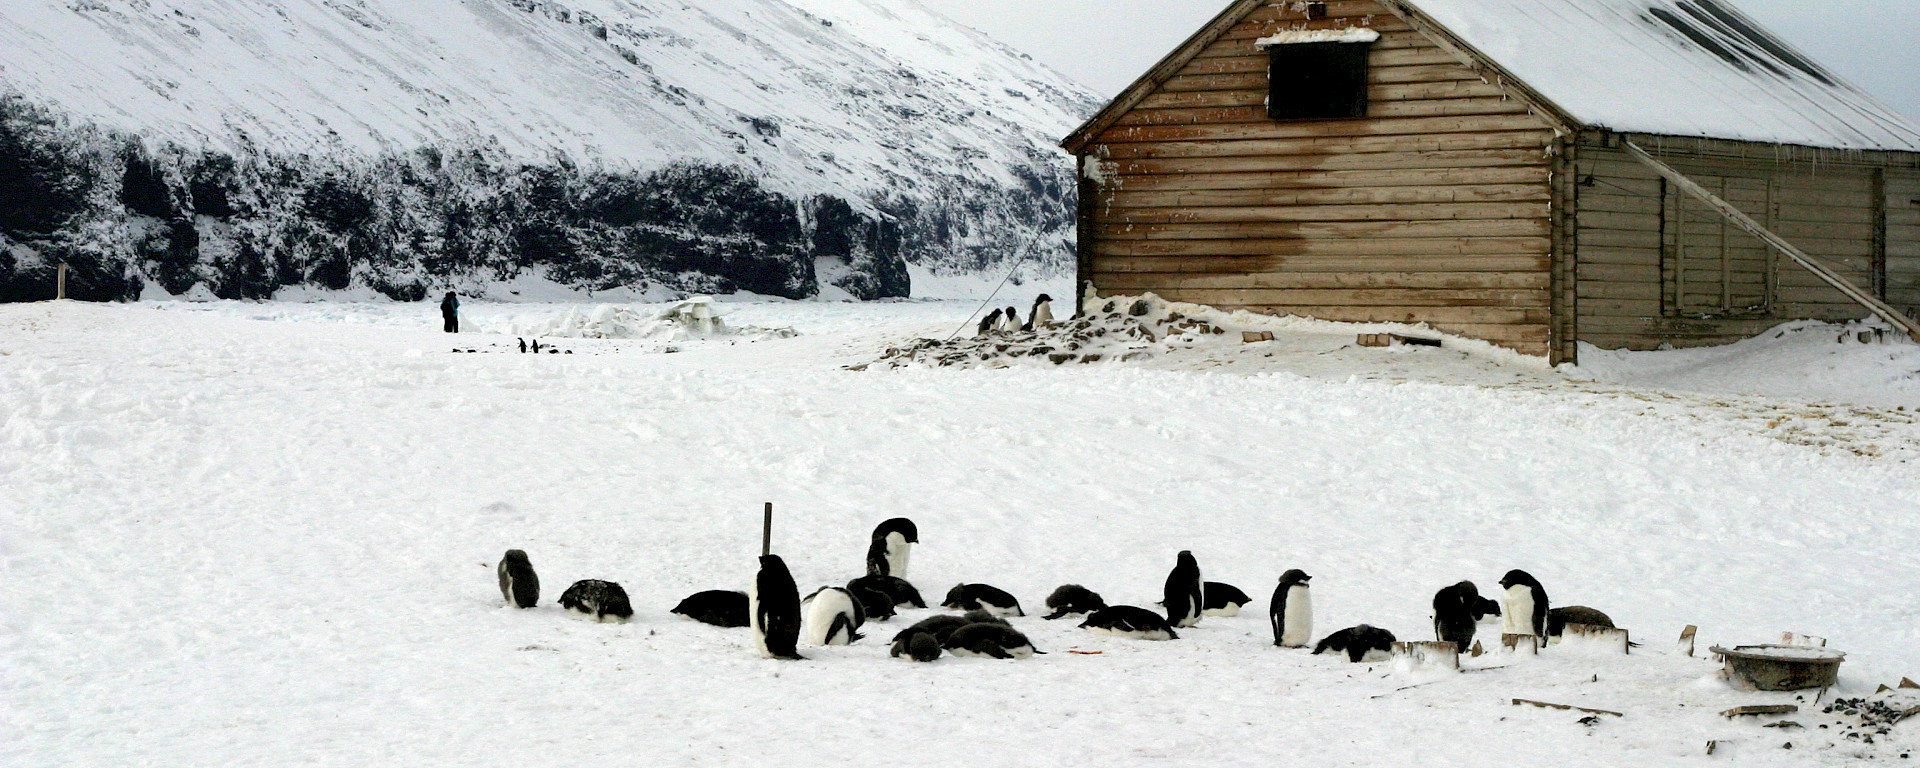 A timber hut with penguins in the foreground.